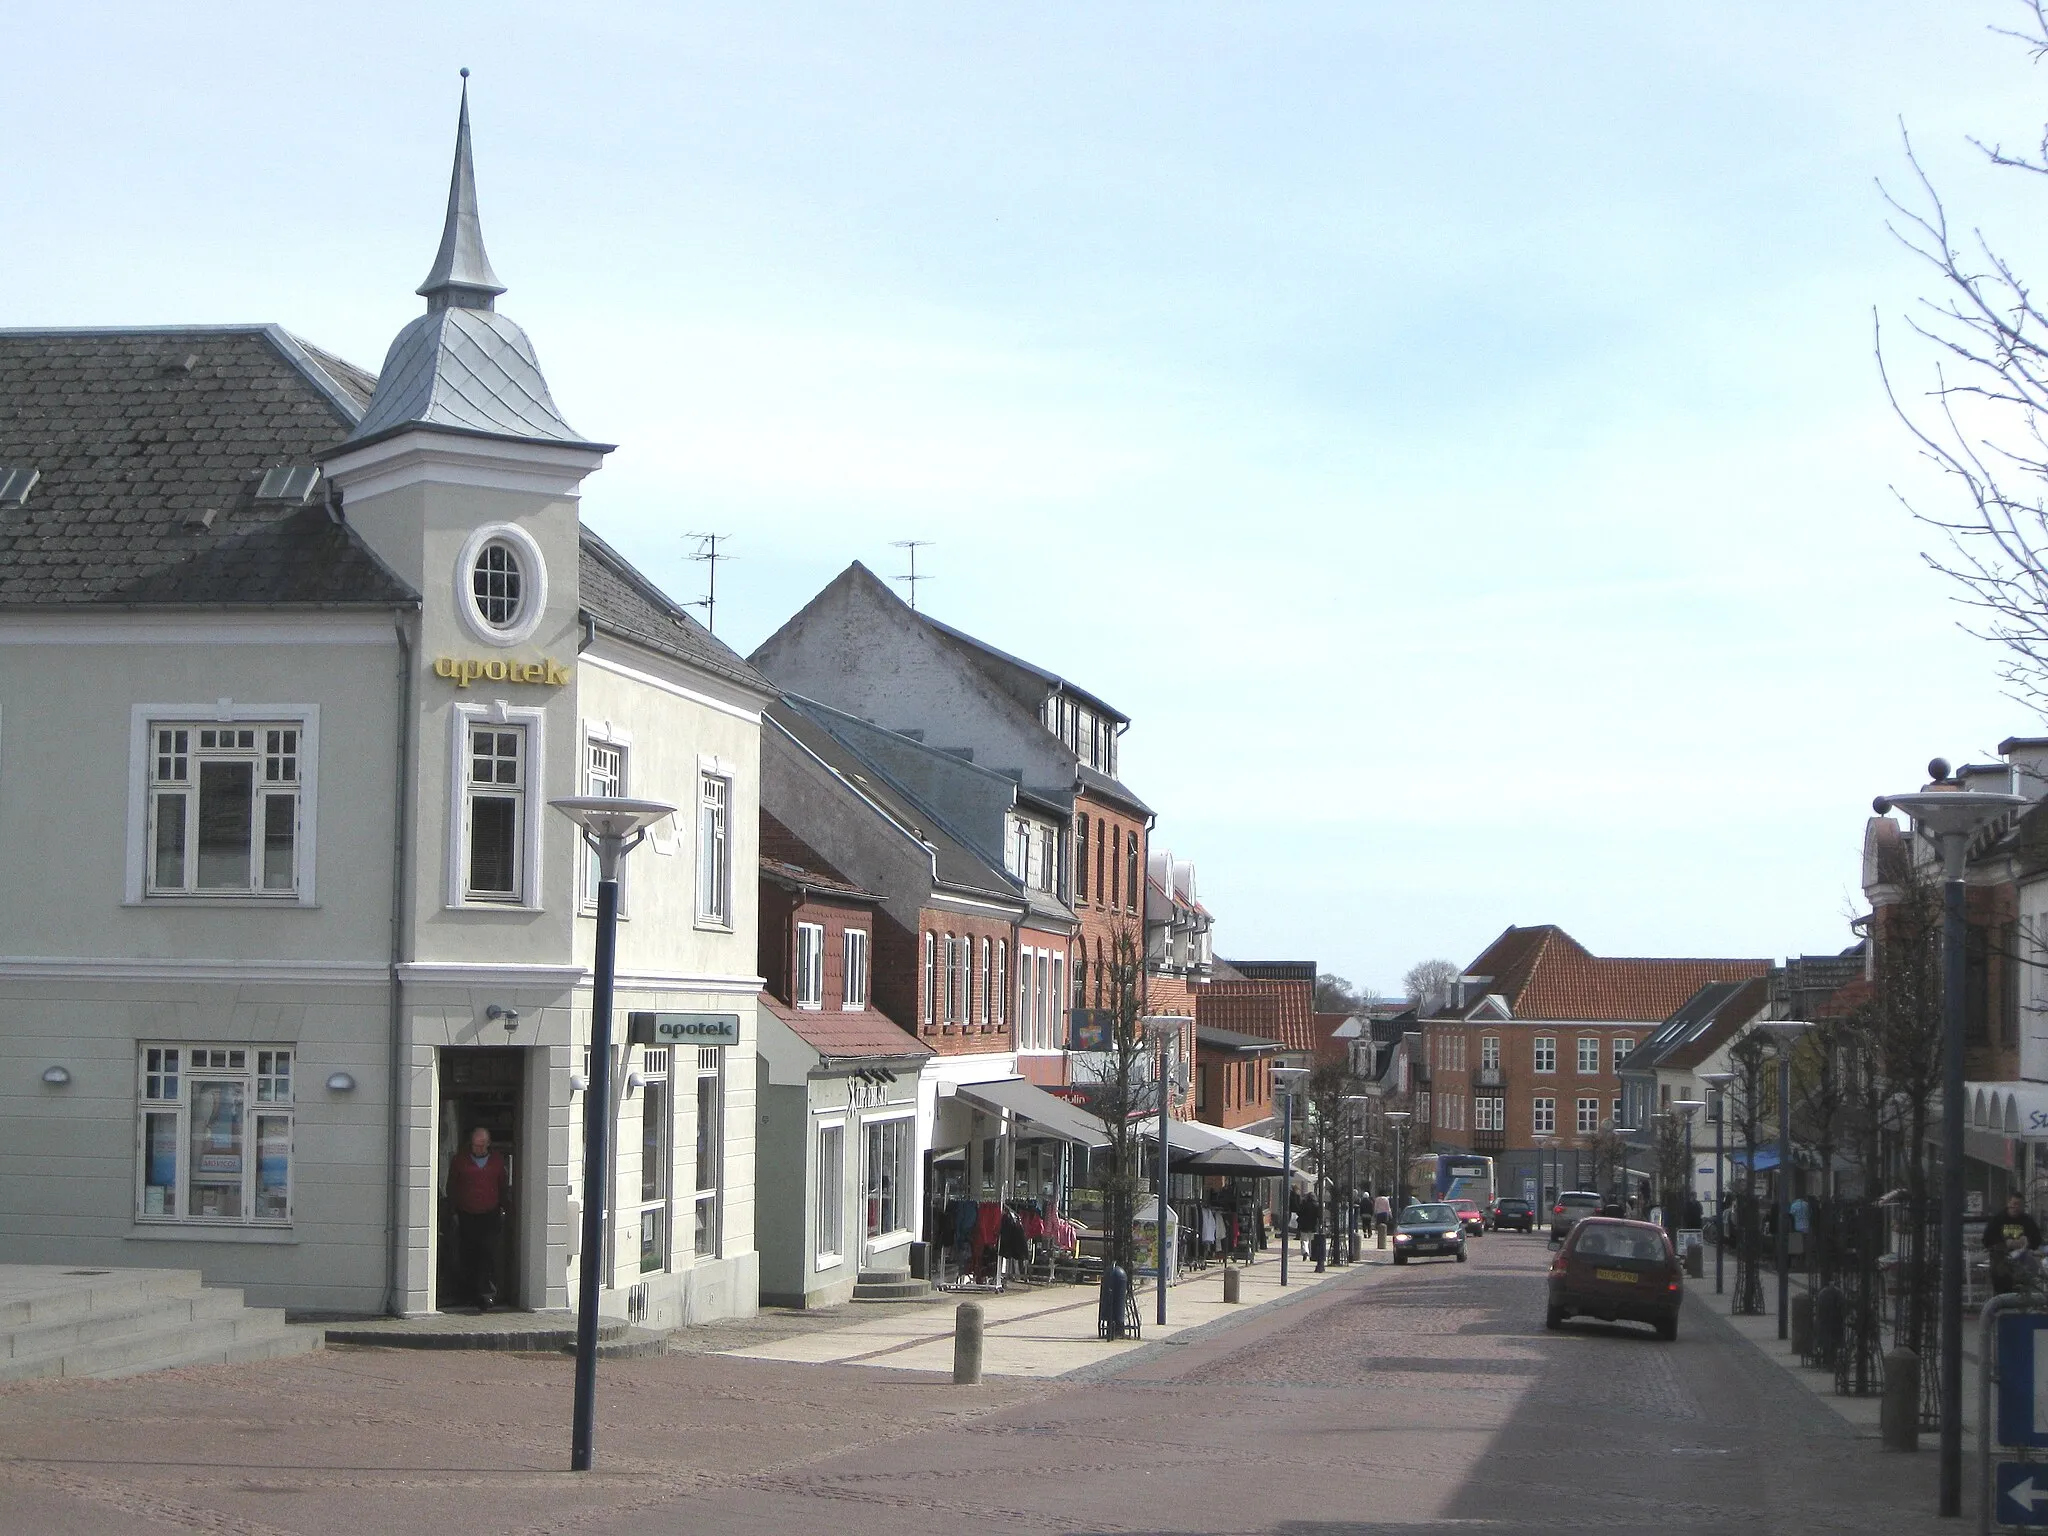 Photo showing: The main street of the small town "Aars". The town is located in North Jutland, Denmark.